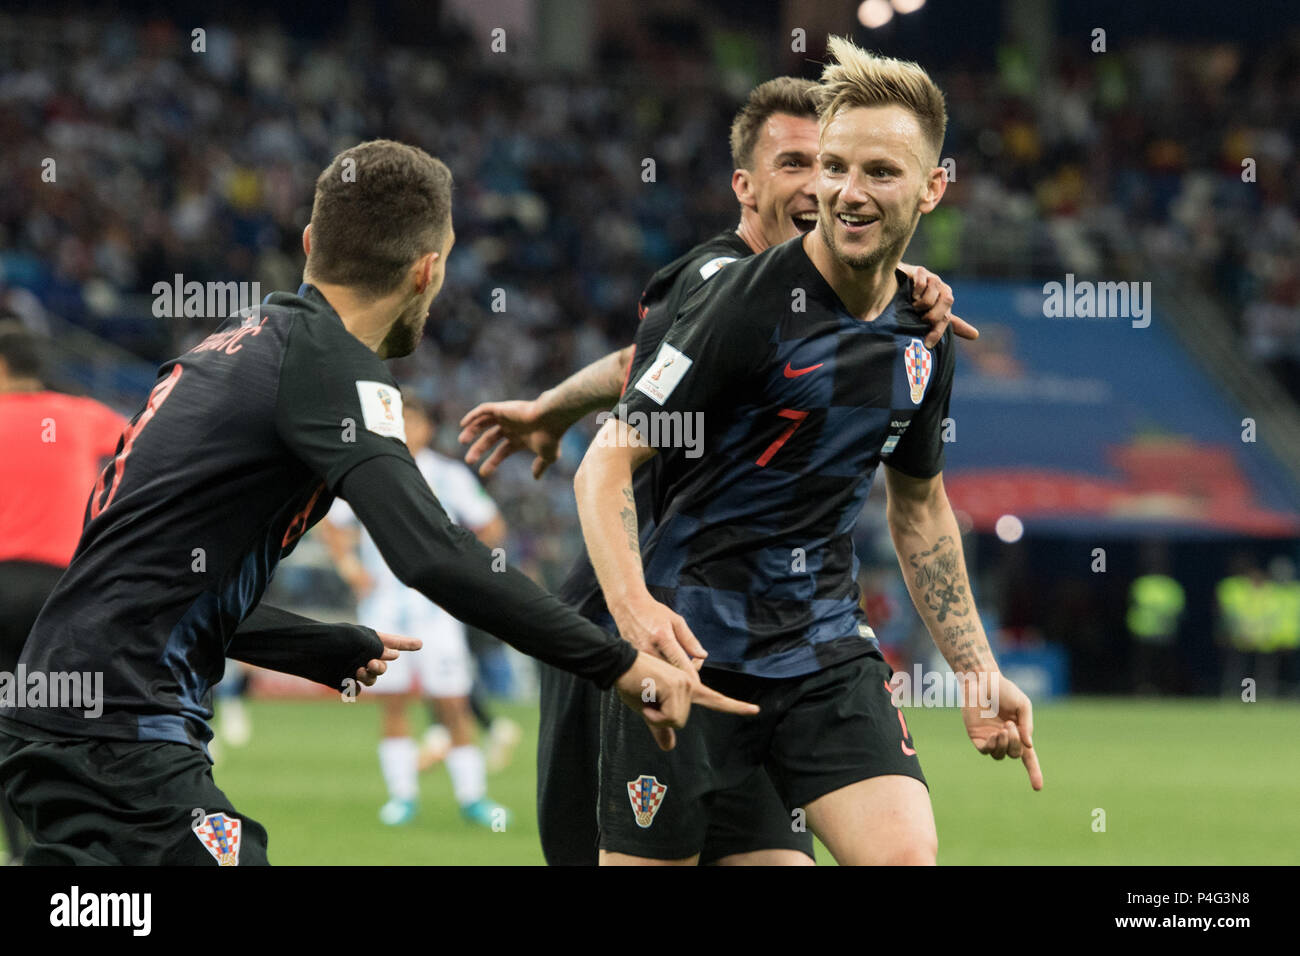 goalkeeper Ivan RAKITIC (right, CRO) cheers with Mateo KOVACIC (left, CRO) and Mario MANDZUKIC (CRO) over the goal to make it 3-0 for Croatia, jubilation, cheering, cheering, joy, cheers, celebrate, goaljubel, half FIGURE, Half Figure, Argentina (ARG) - Croatia (CRO) 0: 3, Preliminary Round, Group D, match 23, on 21.06.2018 in Moscow; Football World Cup 2018 in Russia from 14.06. - 15.07.2018. | usage worldwide Credit: dpa picture alliance/Alamy Live News Stock Photo